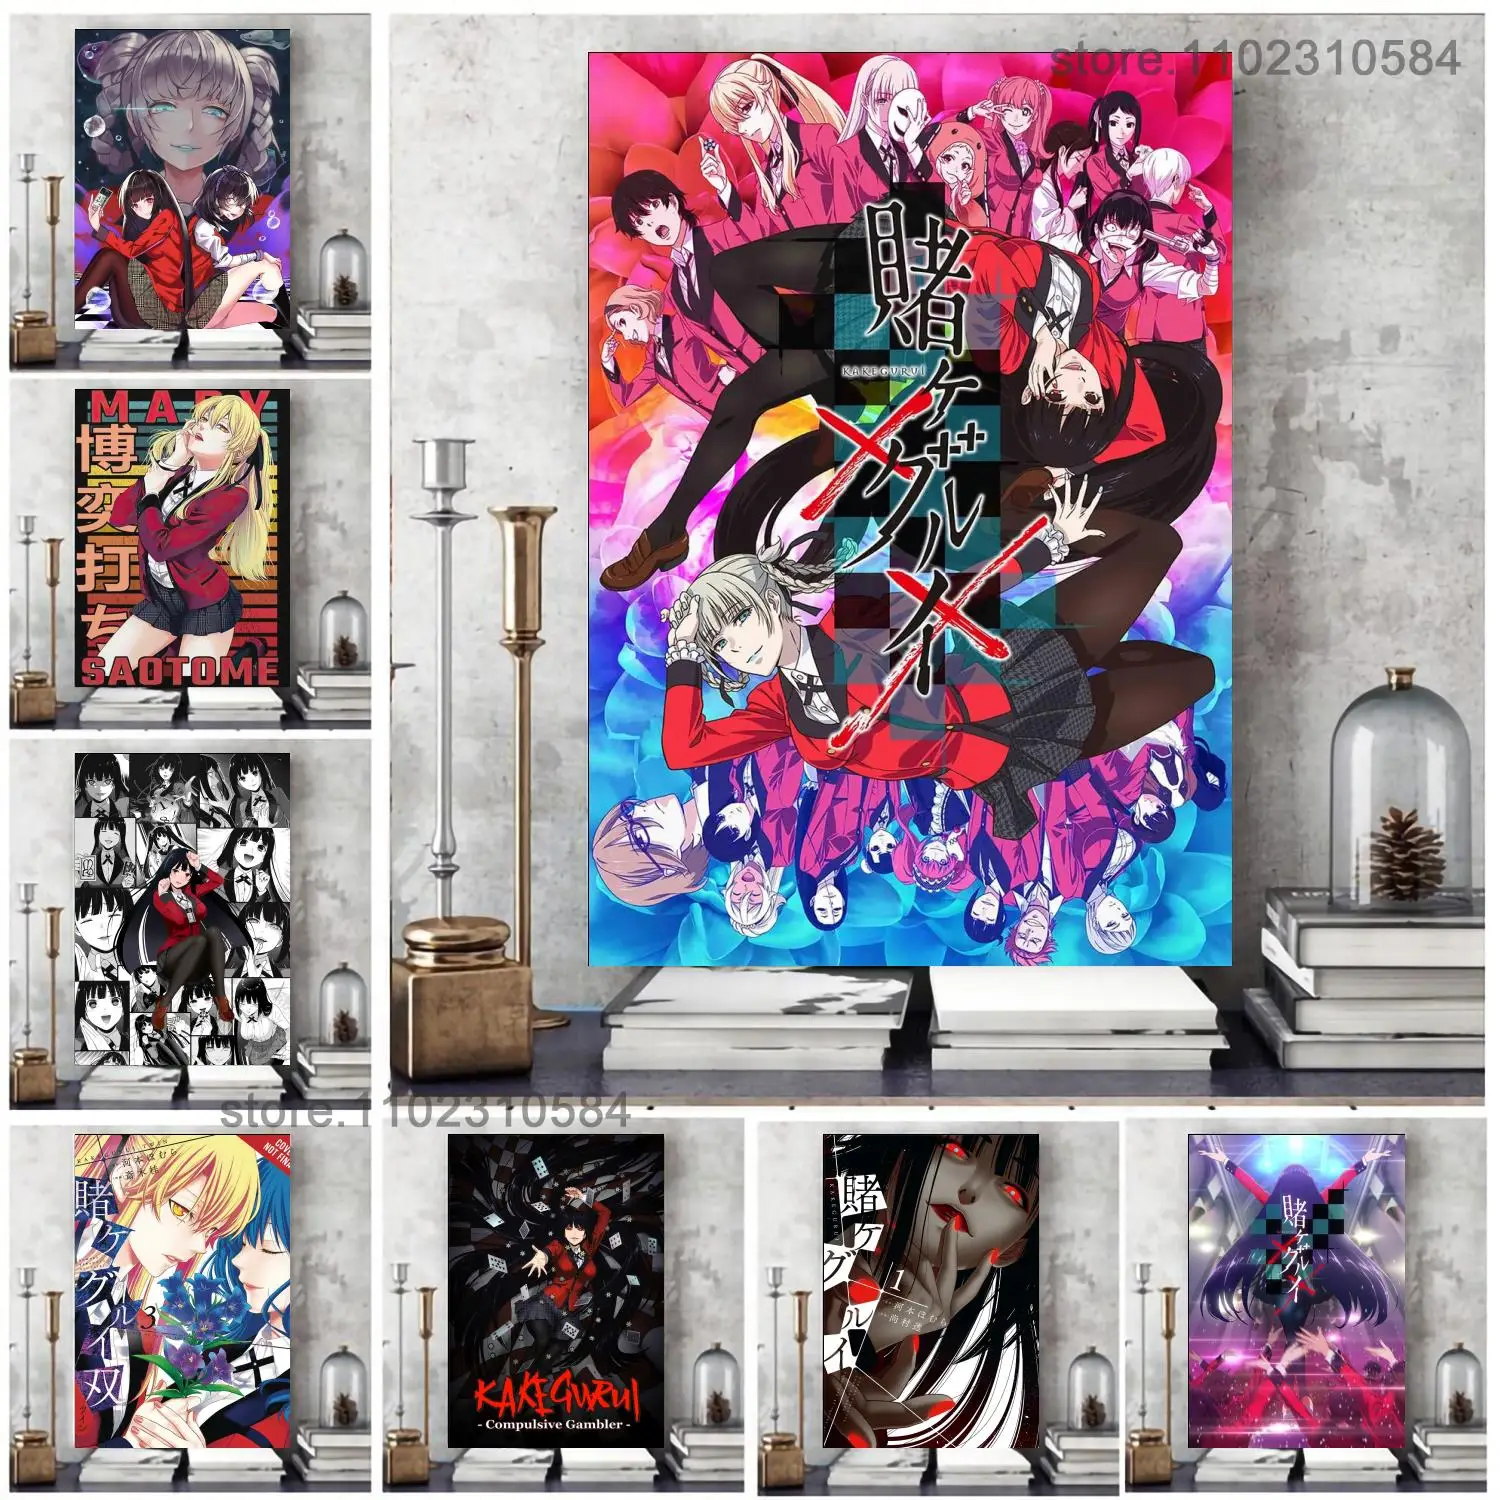 

Kakegurui Compulsive Gambler Poster Wall Art Canvas Posters Decoration Poster Personalized Gift Modern Family bedroom Painting